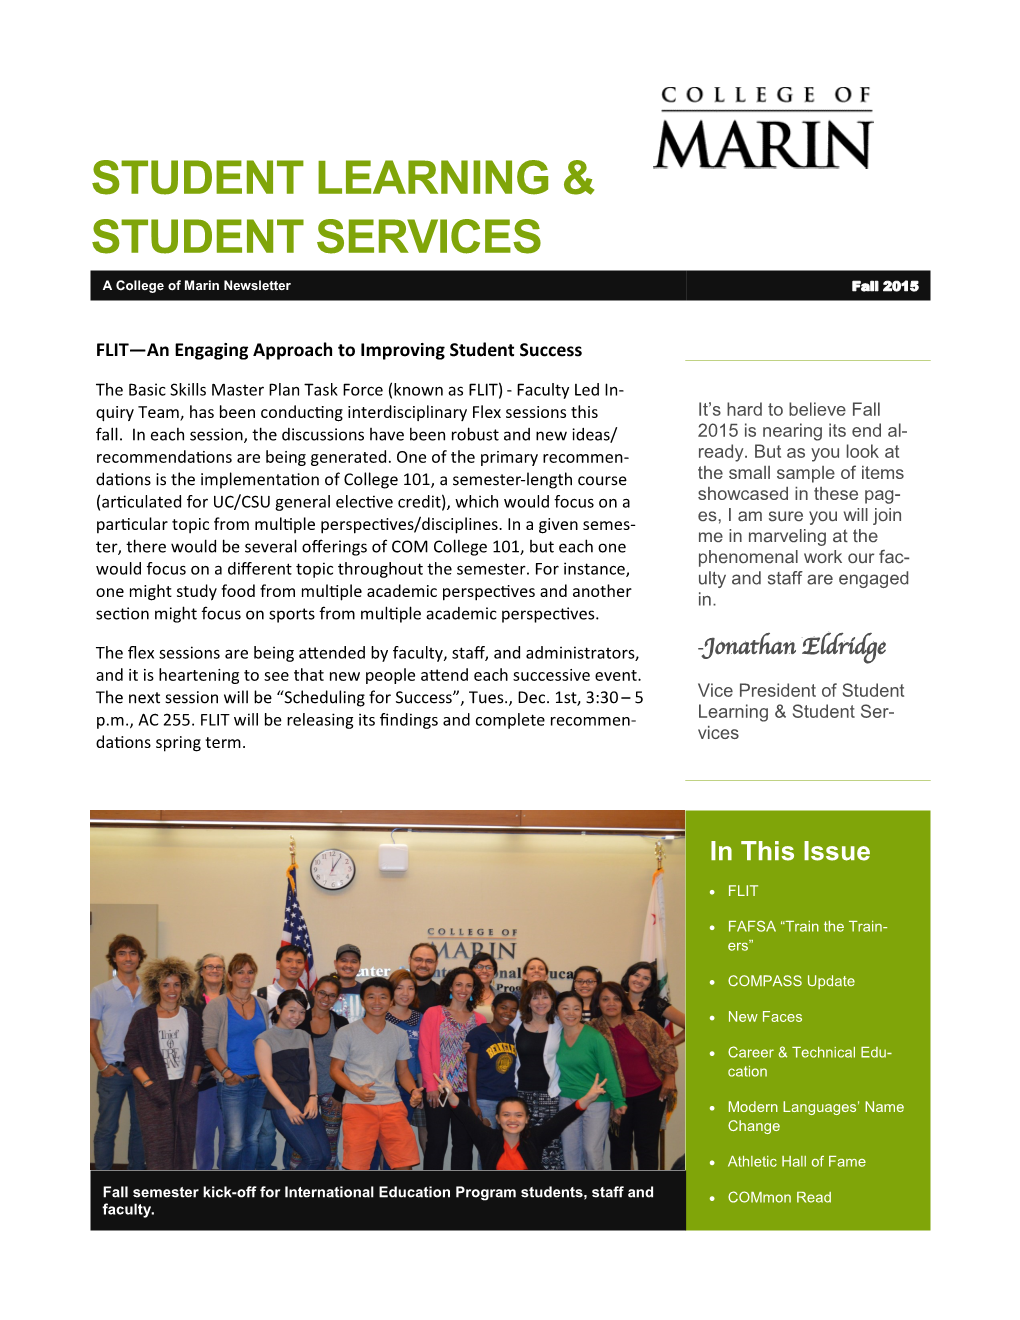 Student Learning & Student Services